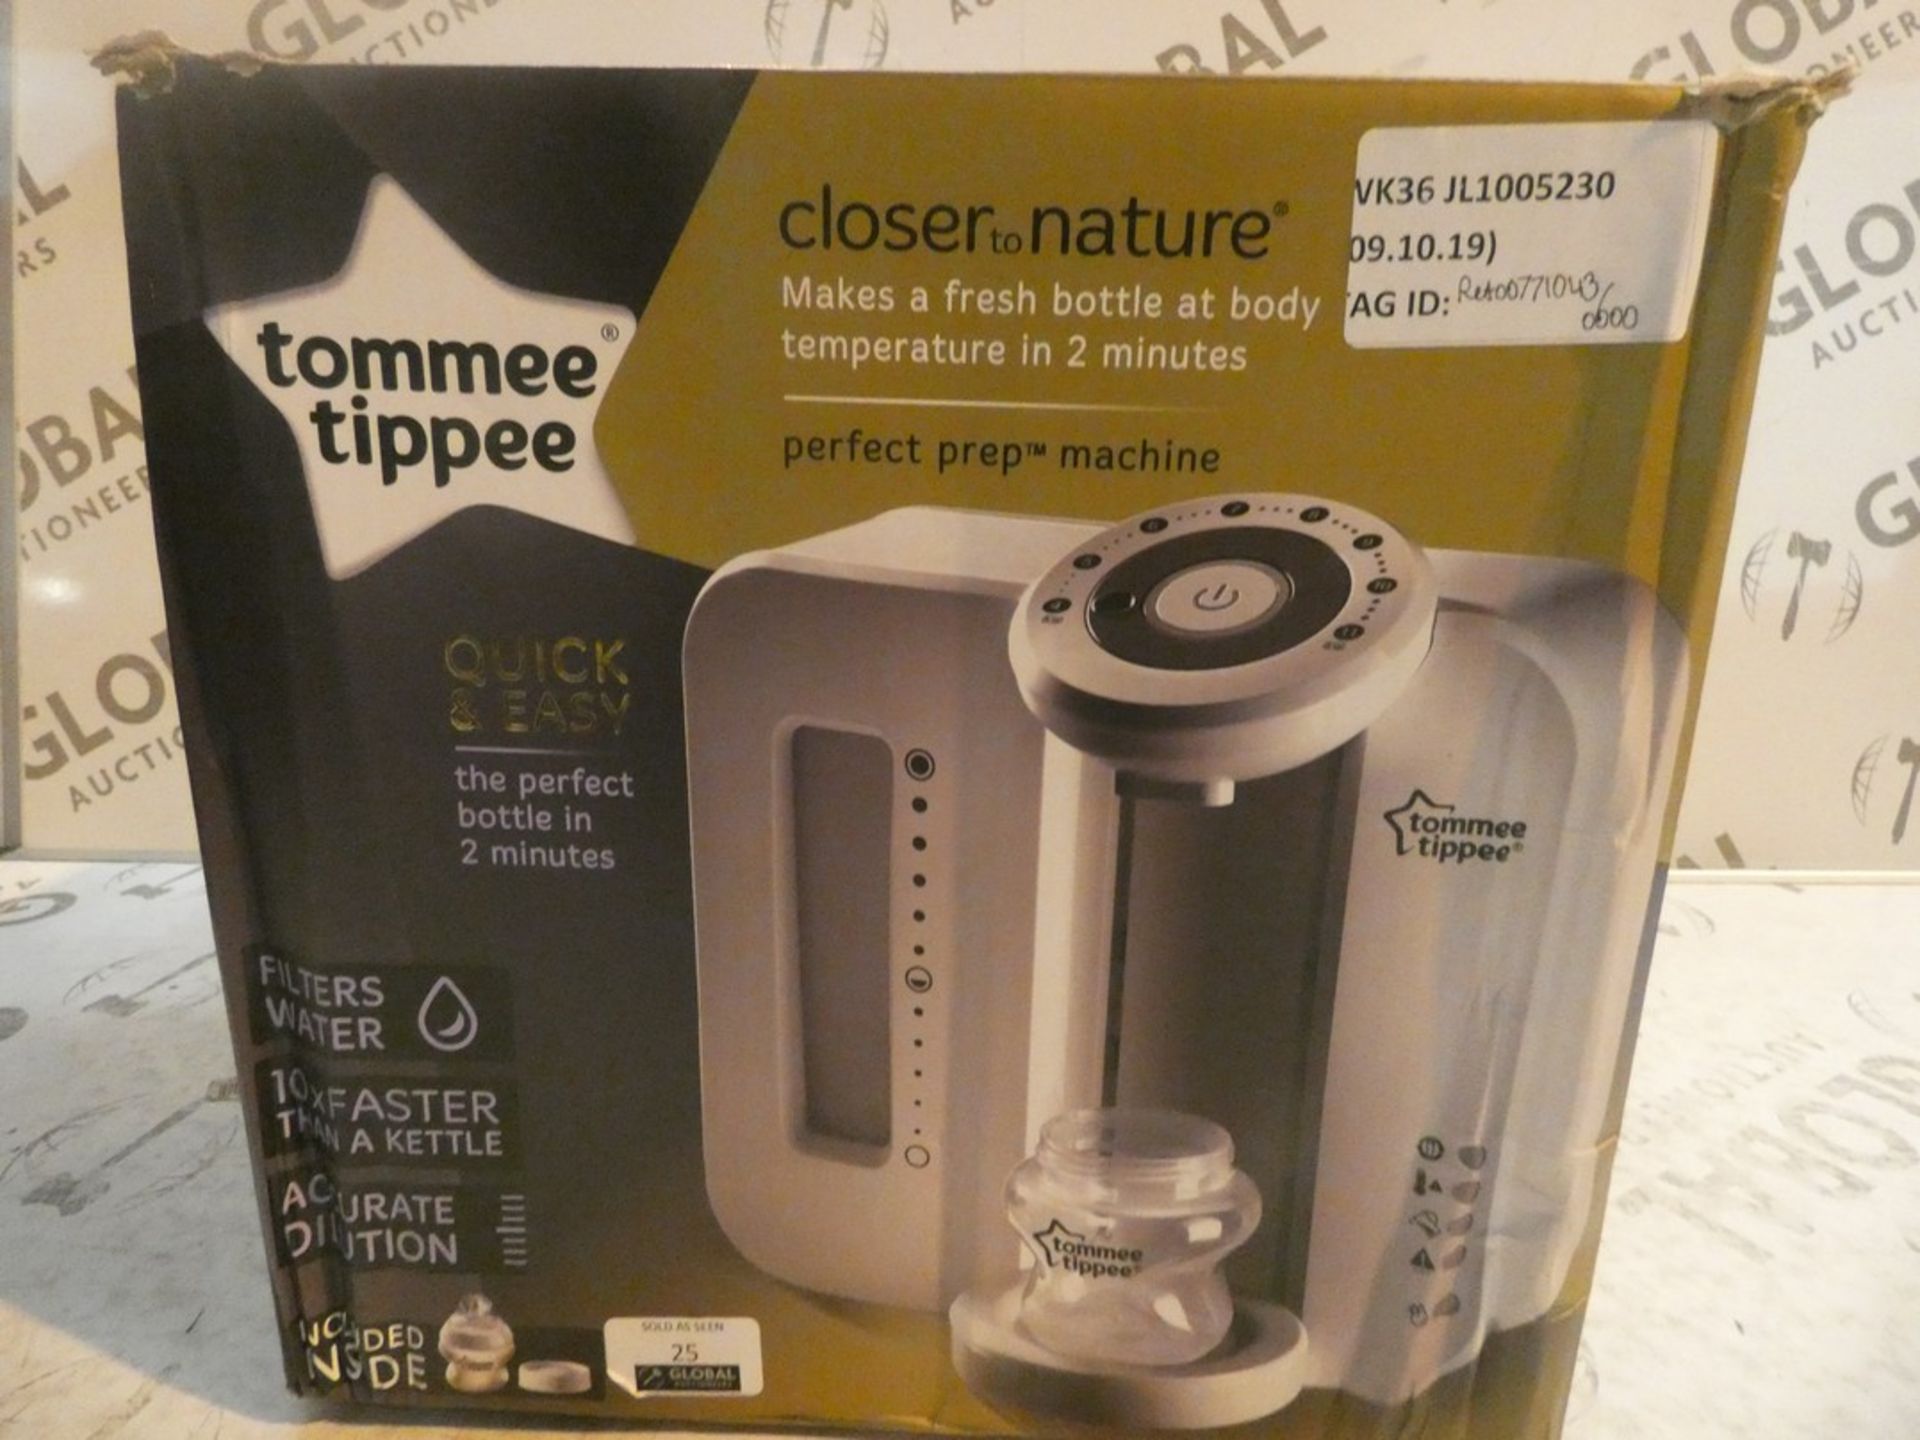 Boxed Tommee Tippee Closer To Nature Perfect Preparation Bottle Warming Station RRP £60 (